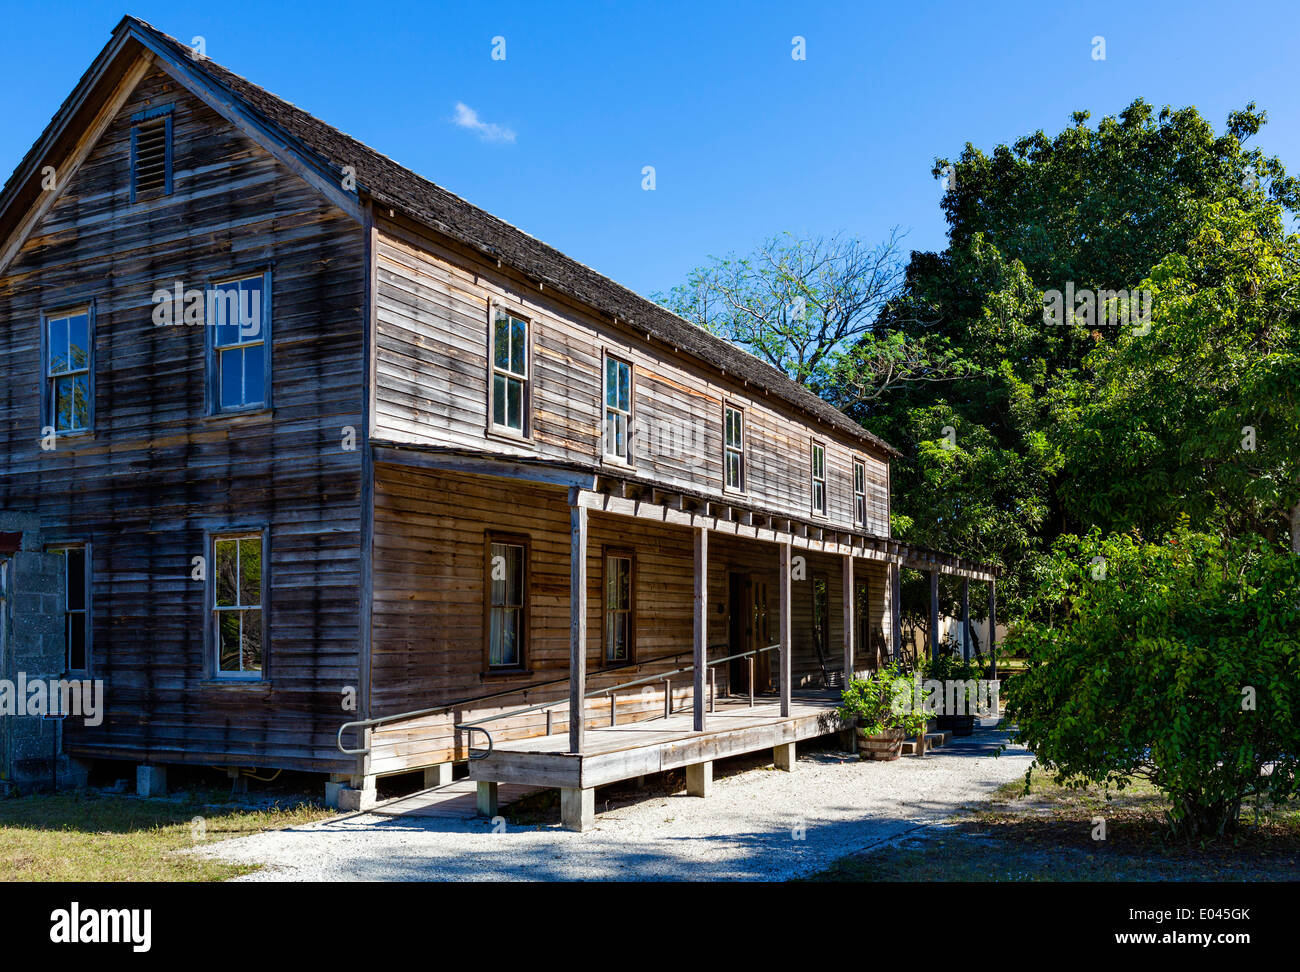 Founder's Home, house of Koreshan Unity Settlement founder Dr Cyrus Teed, Koreshan State Historic Park, Estero, Florida, USA Stock Photo